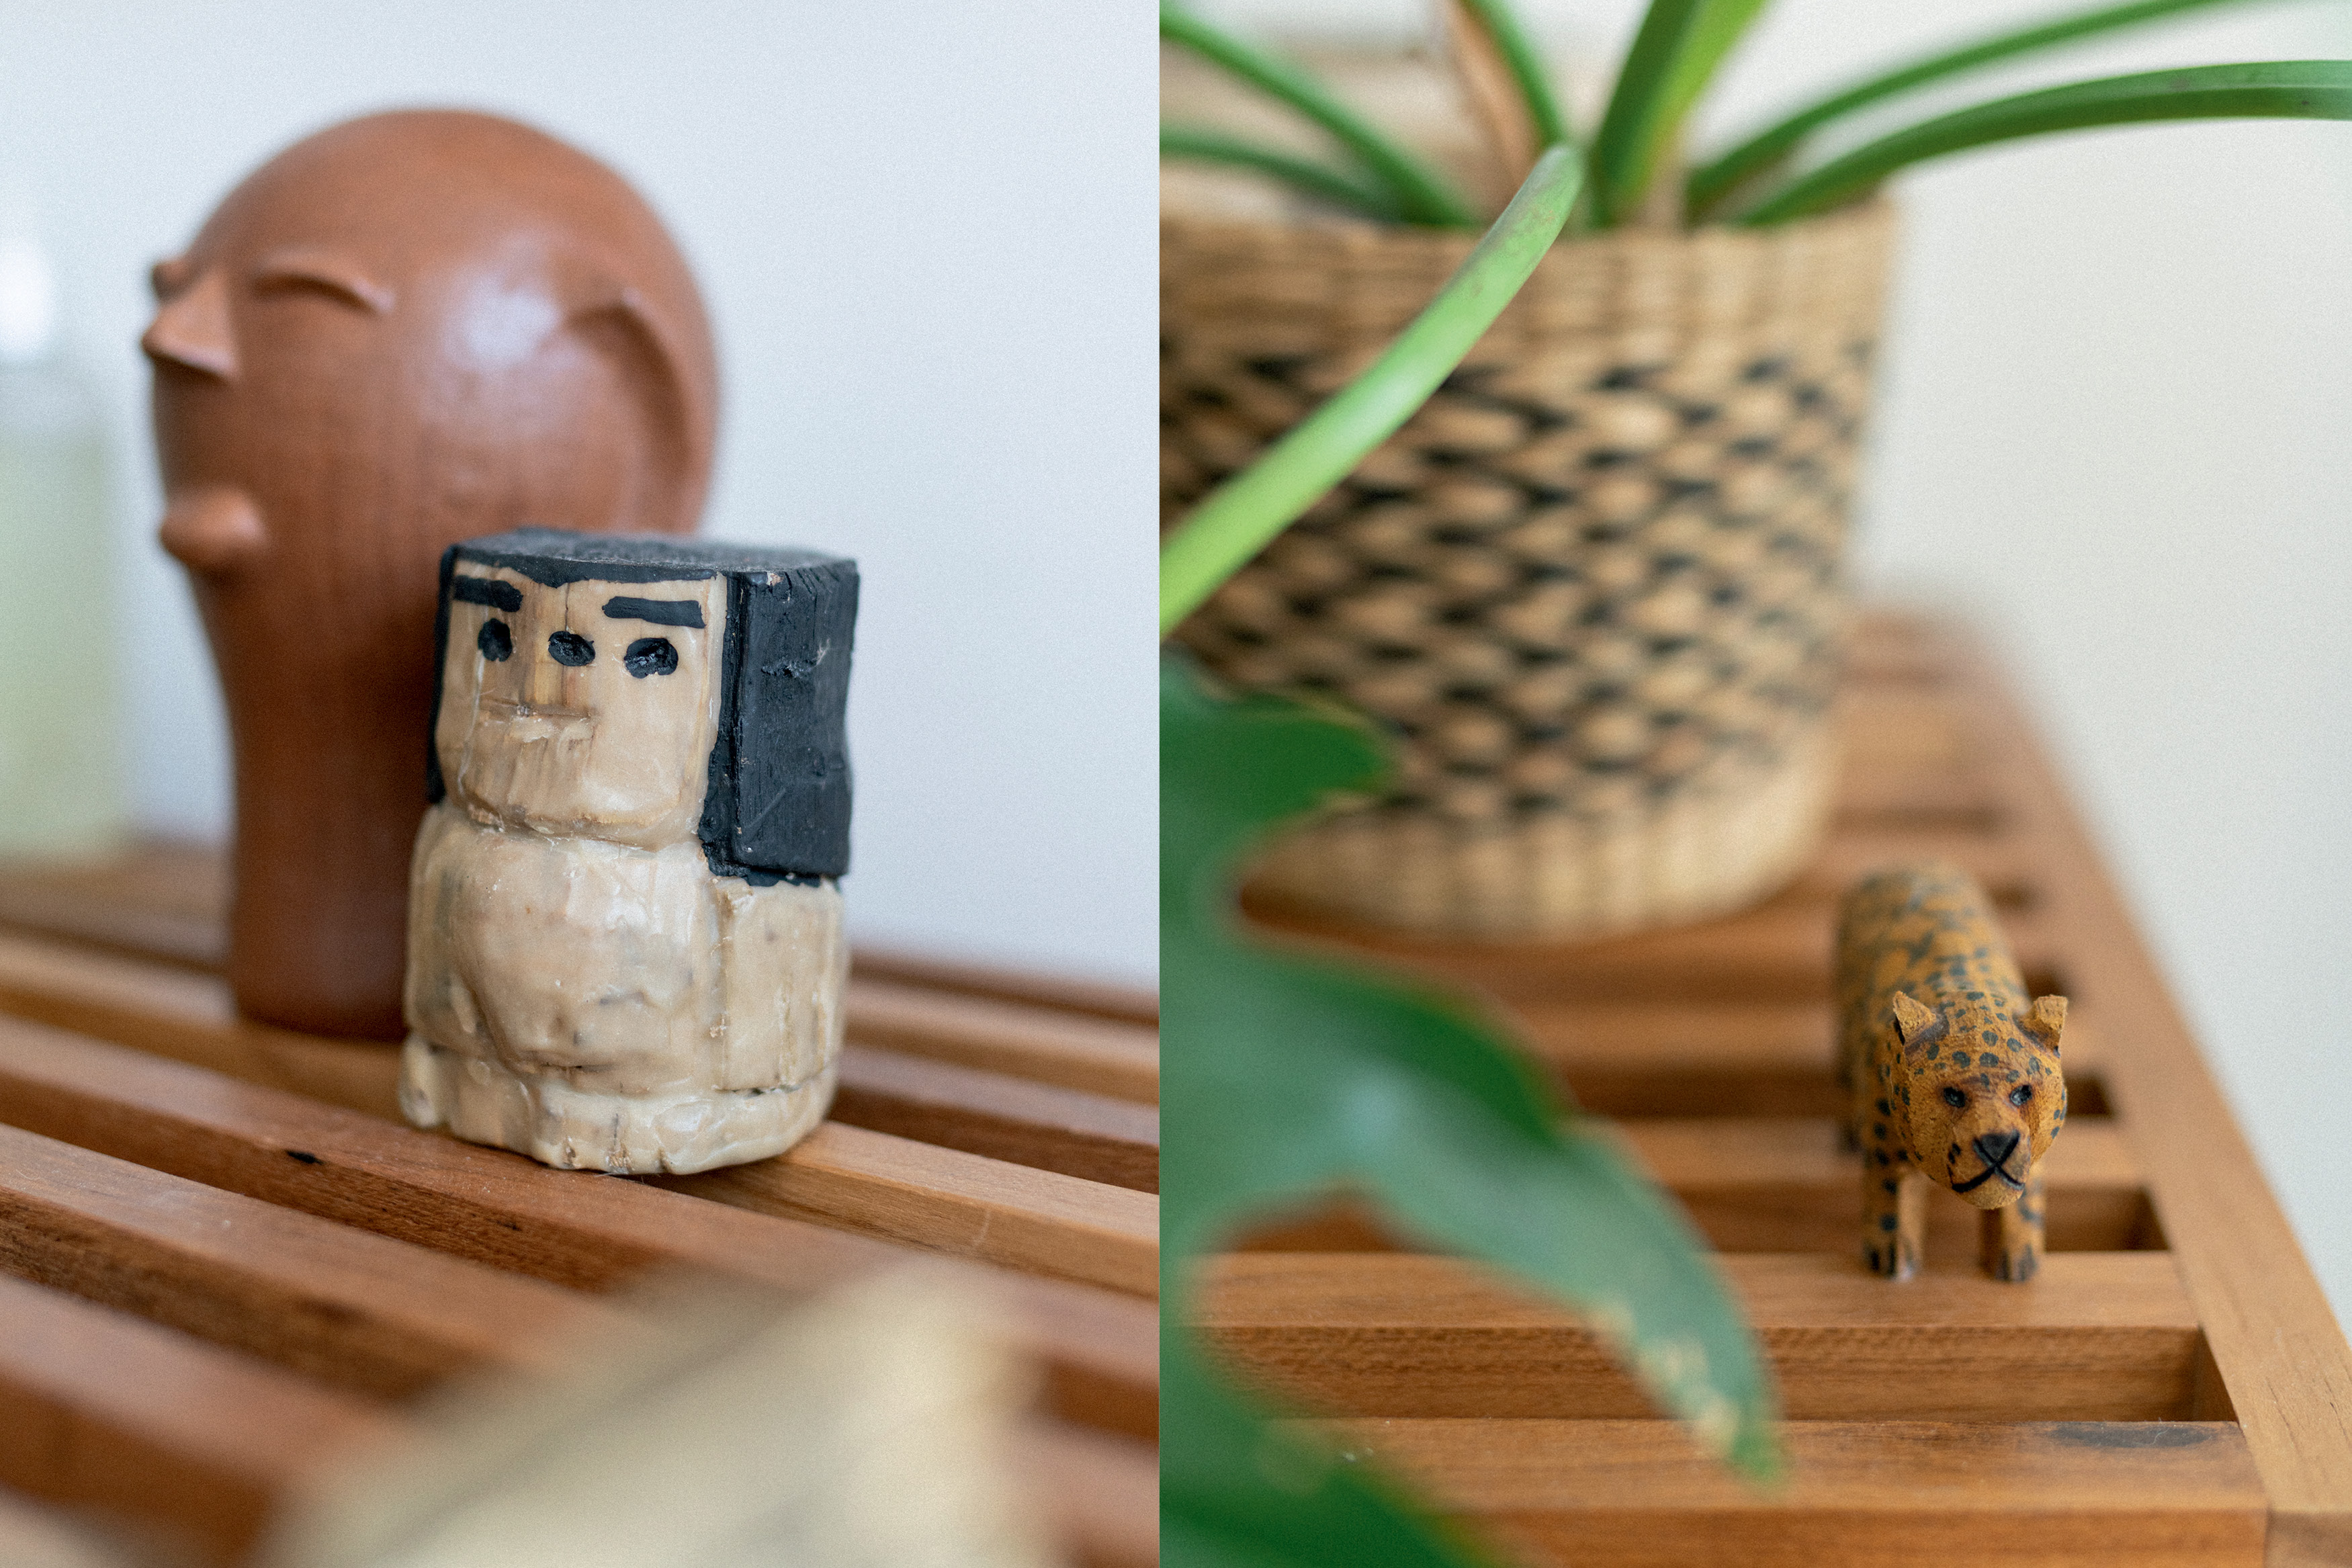 Both sculptures were purchased by Carol at the São Paulo Museum of Art store: the clay head is by Cida Lima and the little buggy is a reproduction of the work of Conceição dos Bugres.  “I like to mix so-called 'popular' art works with contemporary art, blurring the boundaries between 'high' and 'low' culture.”  Next to it, the Bicho do Pantanal, created by the people of the Terena ethnic group